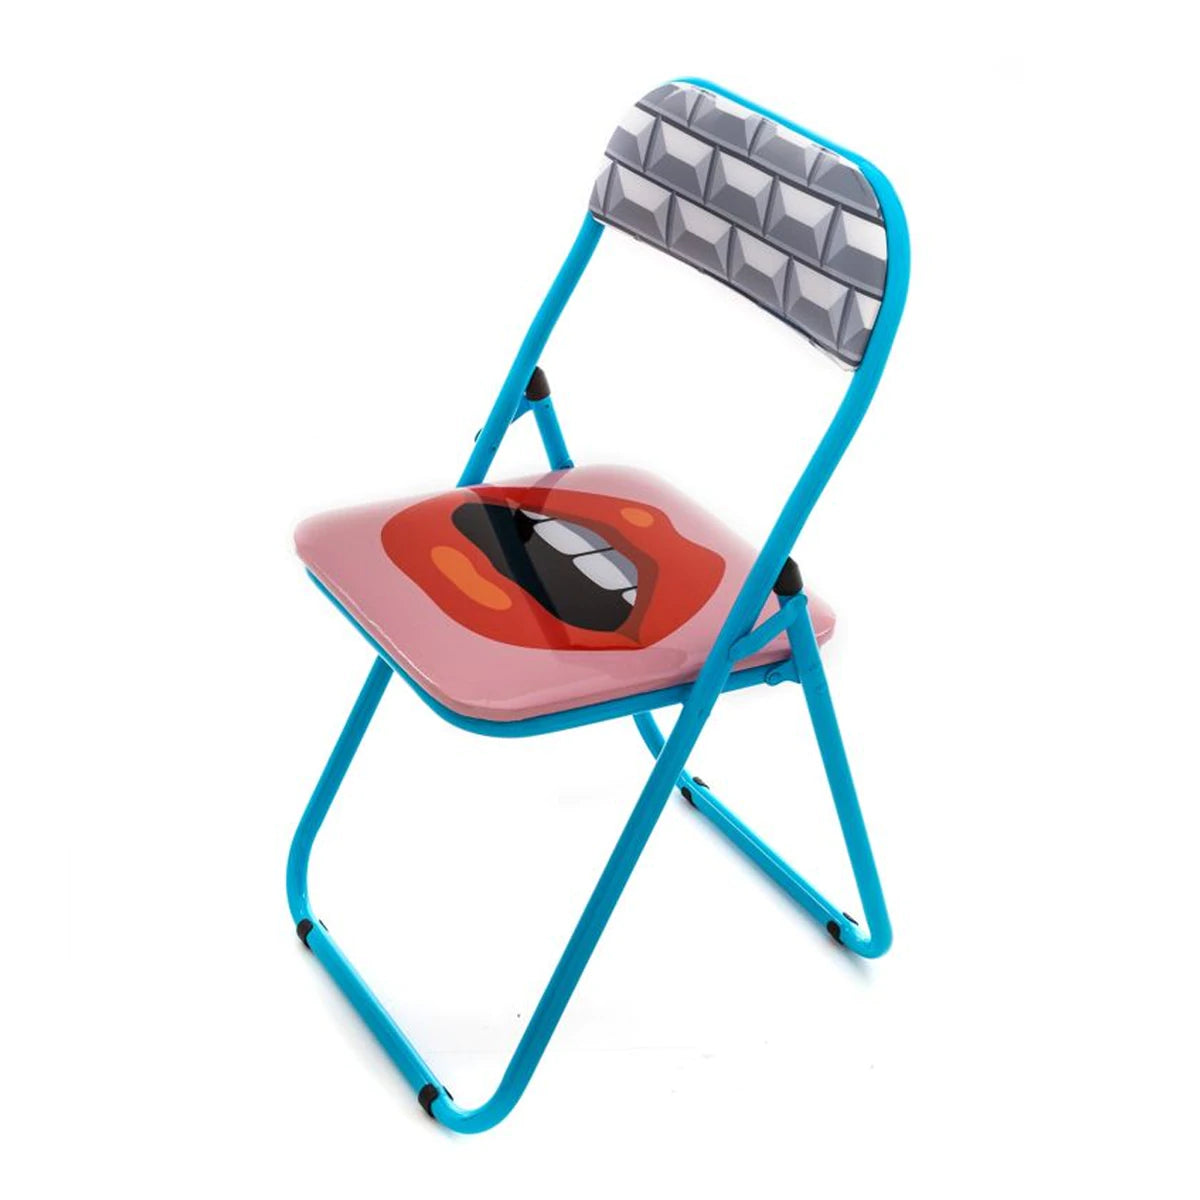 MOUTH folding chair